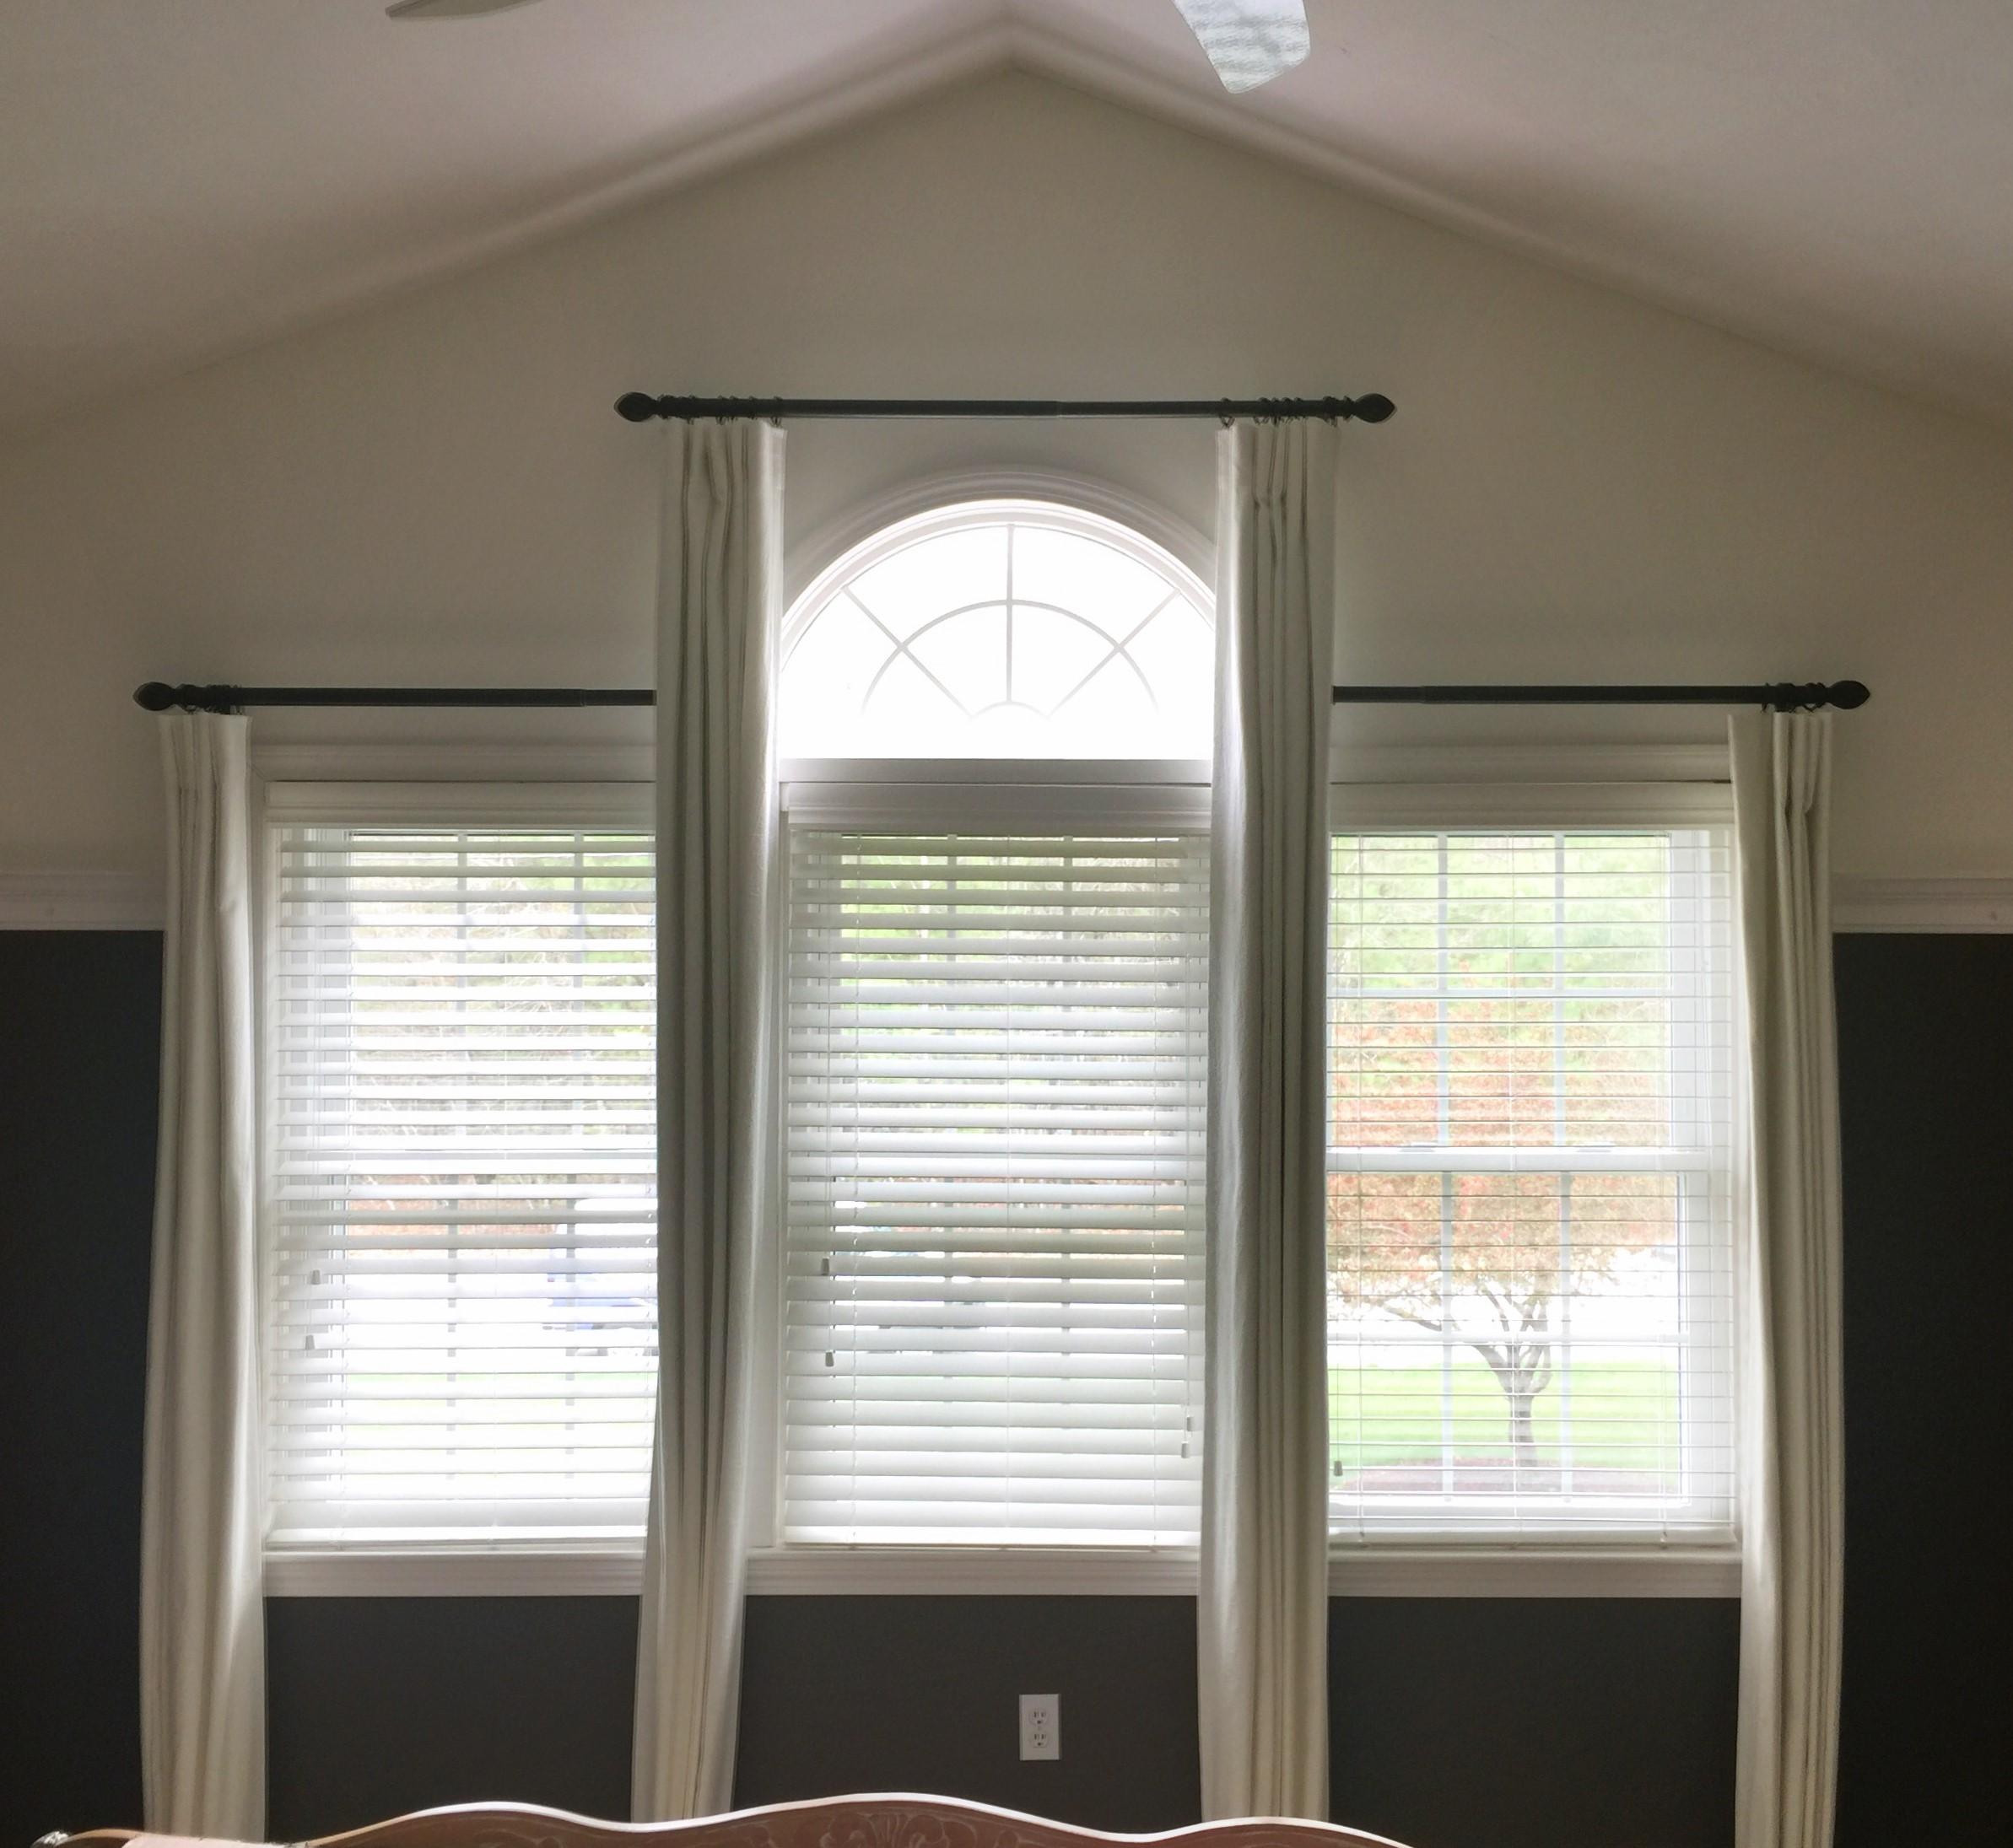 Budget Blinds in Nashua, NH 03063 - ChamberofCommerce.com